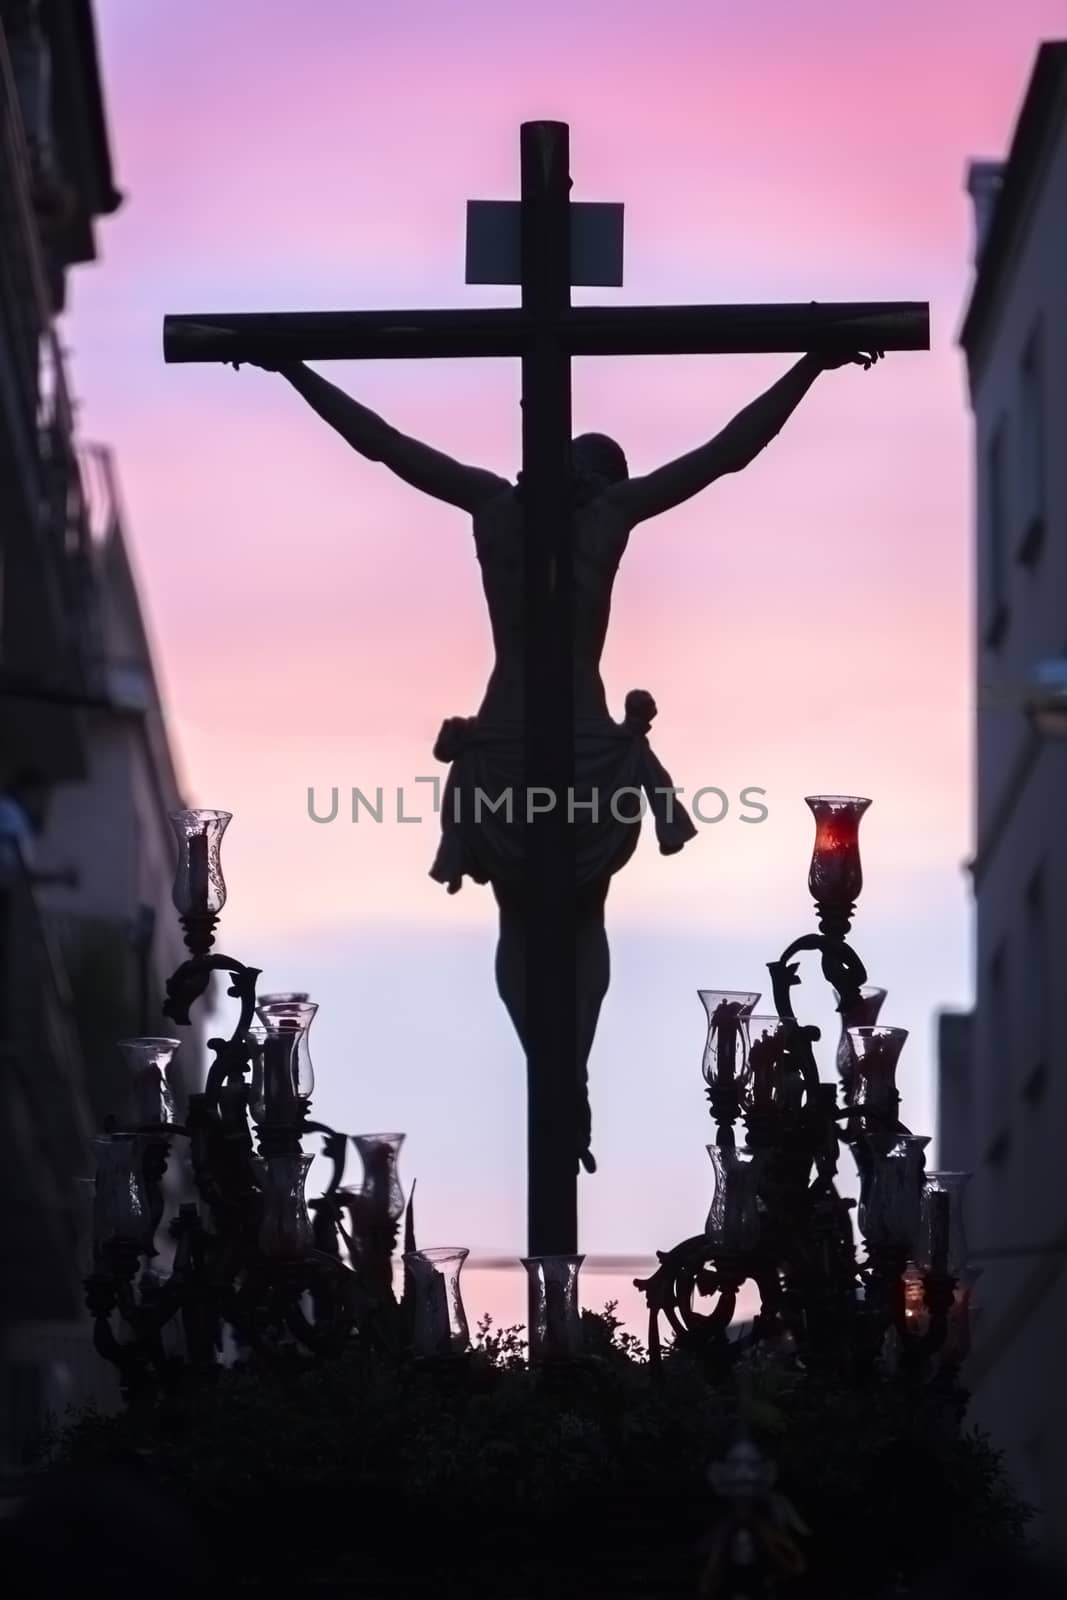 Linares, Jaen province, SPAIN - March 16, 2014: Figure of Jesus on the cross carved in wood by the sculptor Alvarez Duarte, Holy Christ of the Estudiantes, Linares, Jaen province, Spain